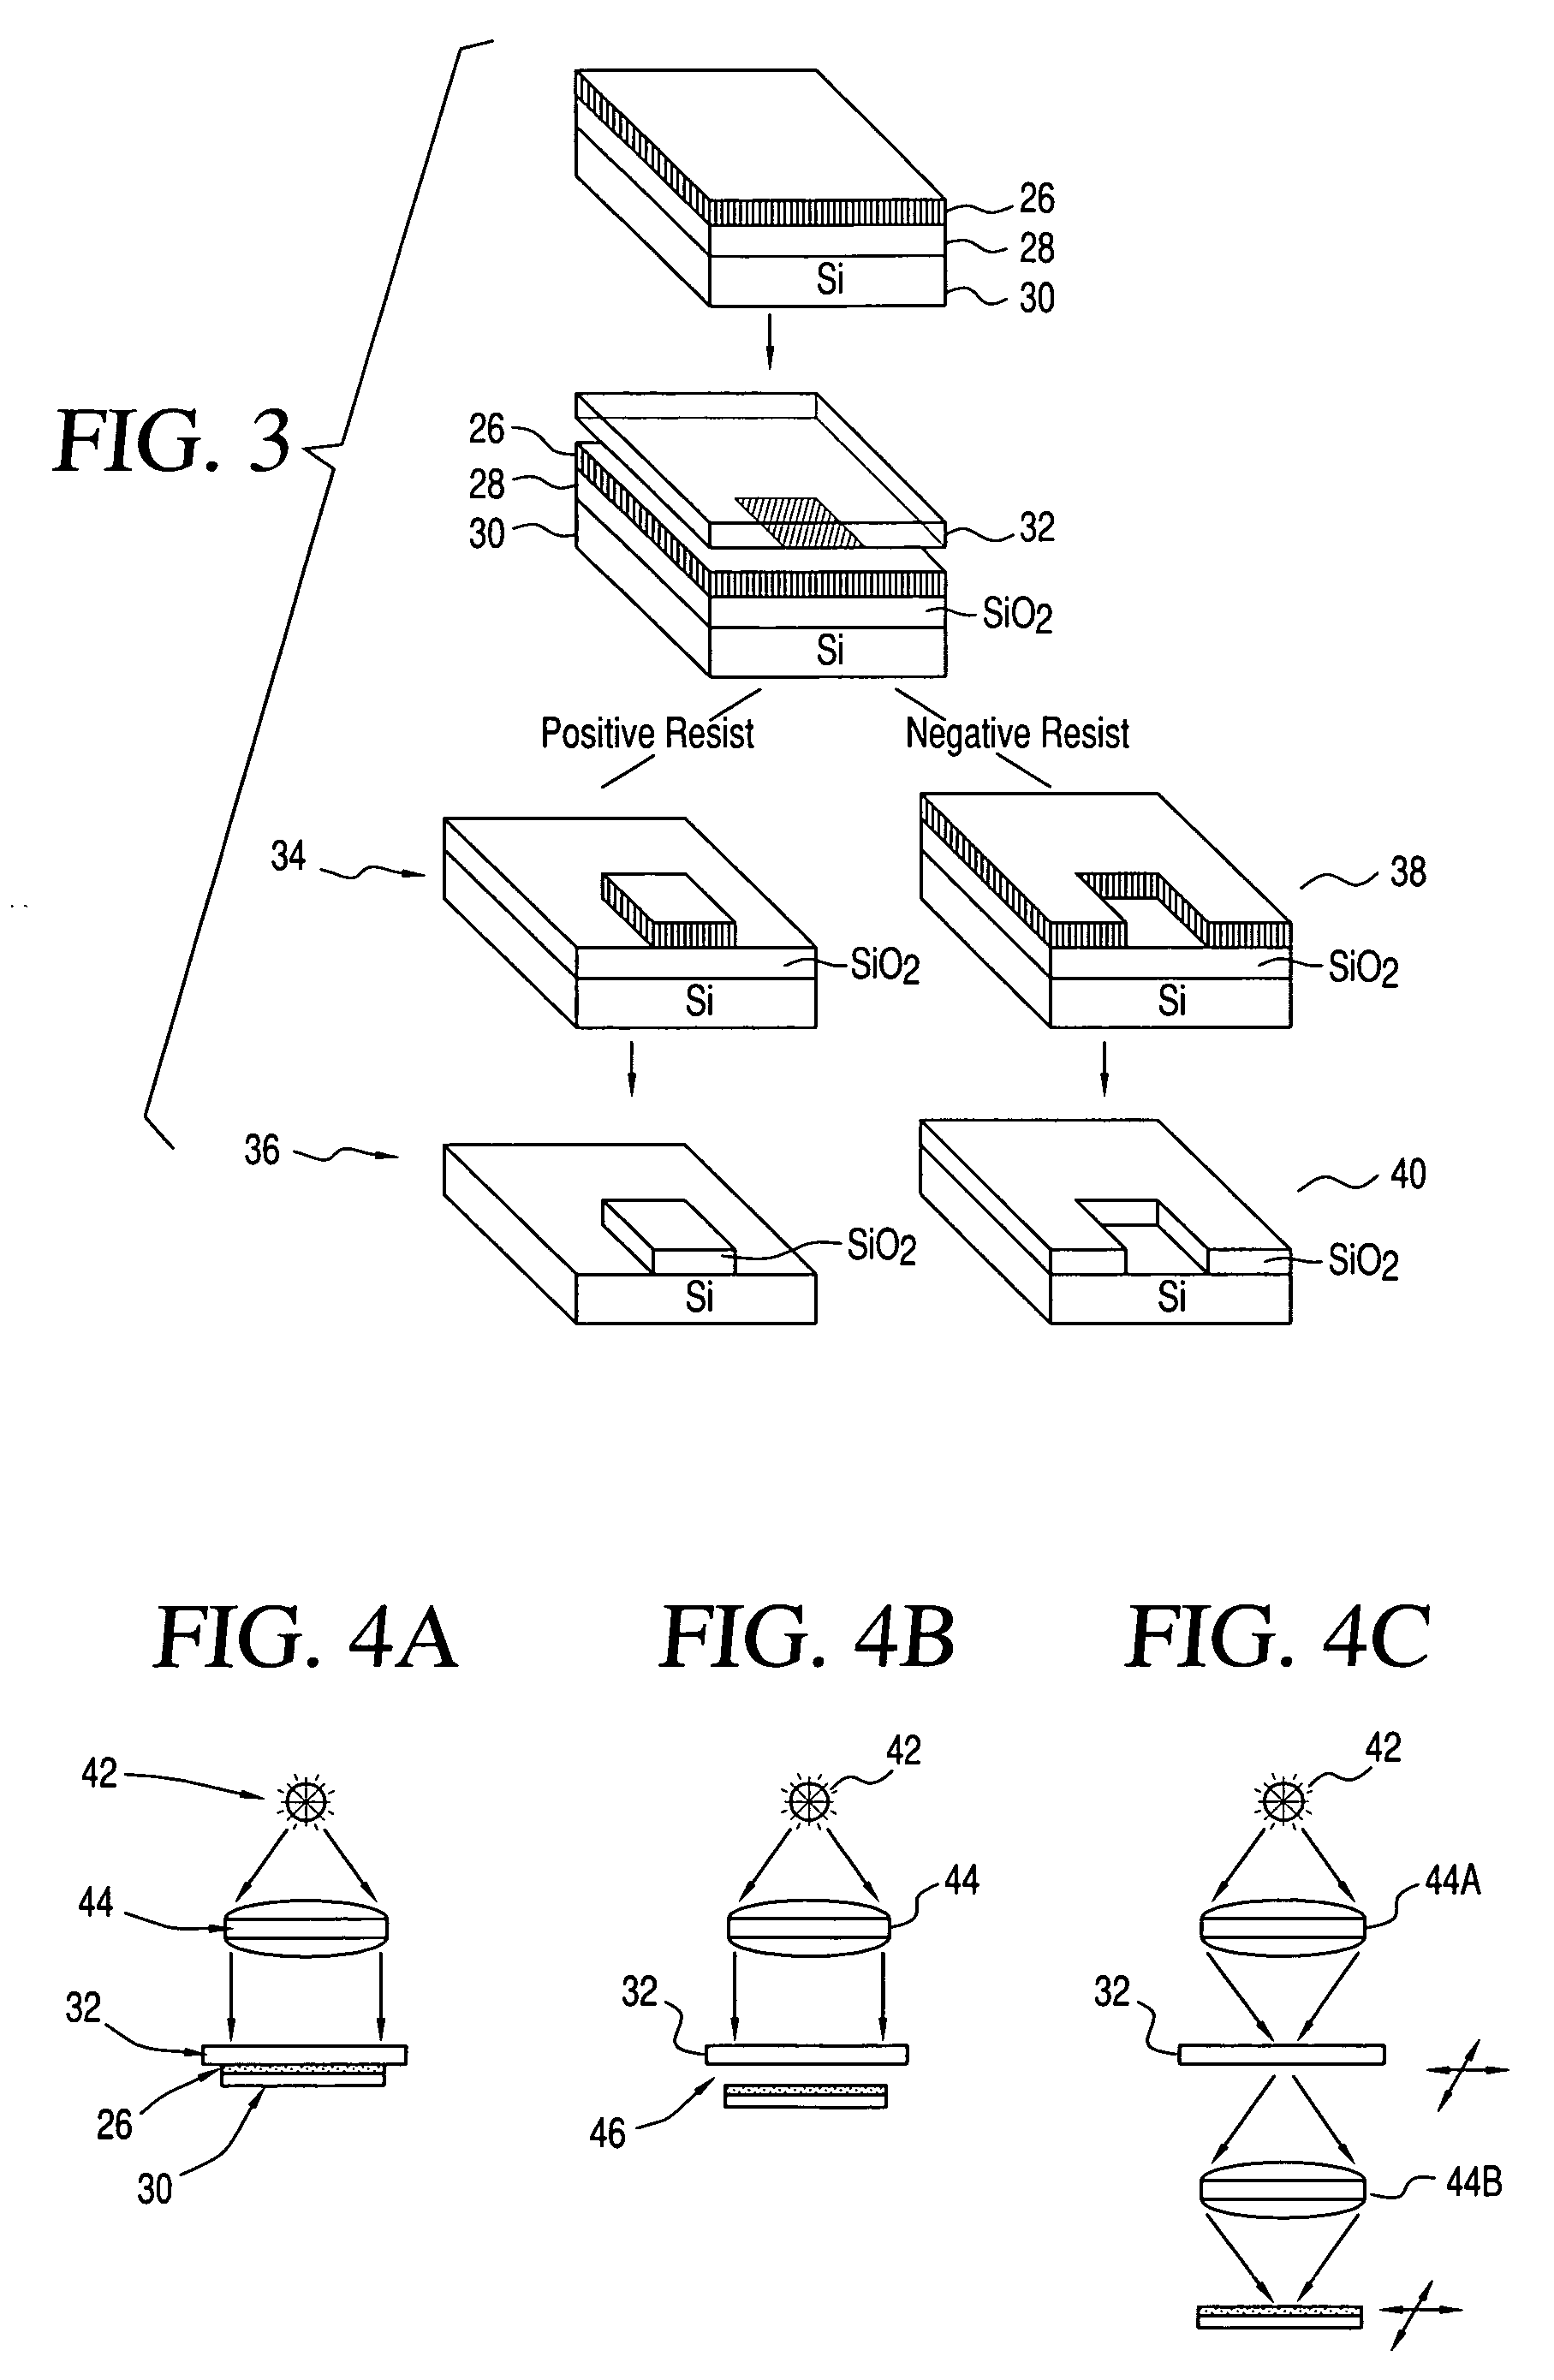 Printable electronic features on non-uniform substrate and processes for making same